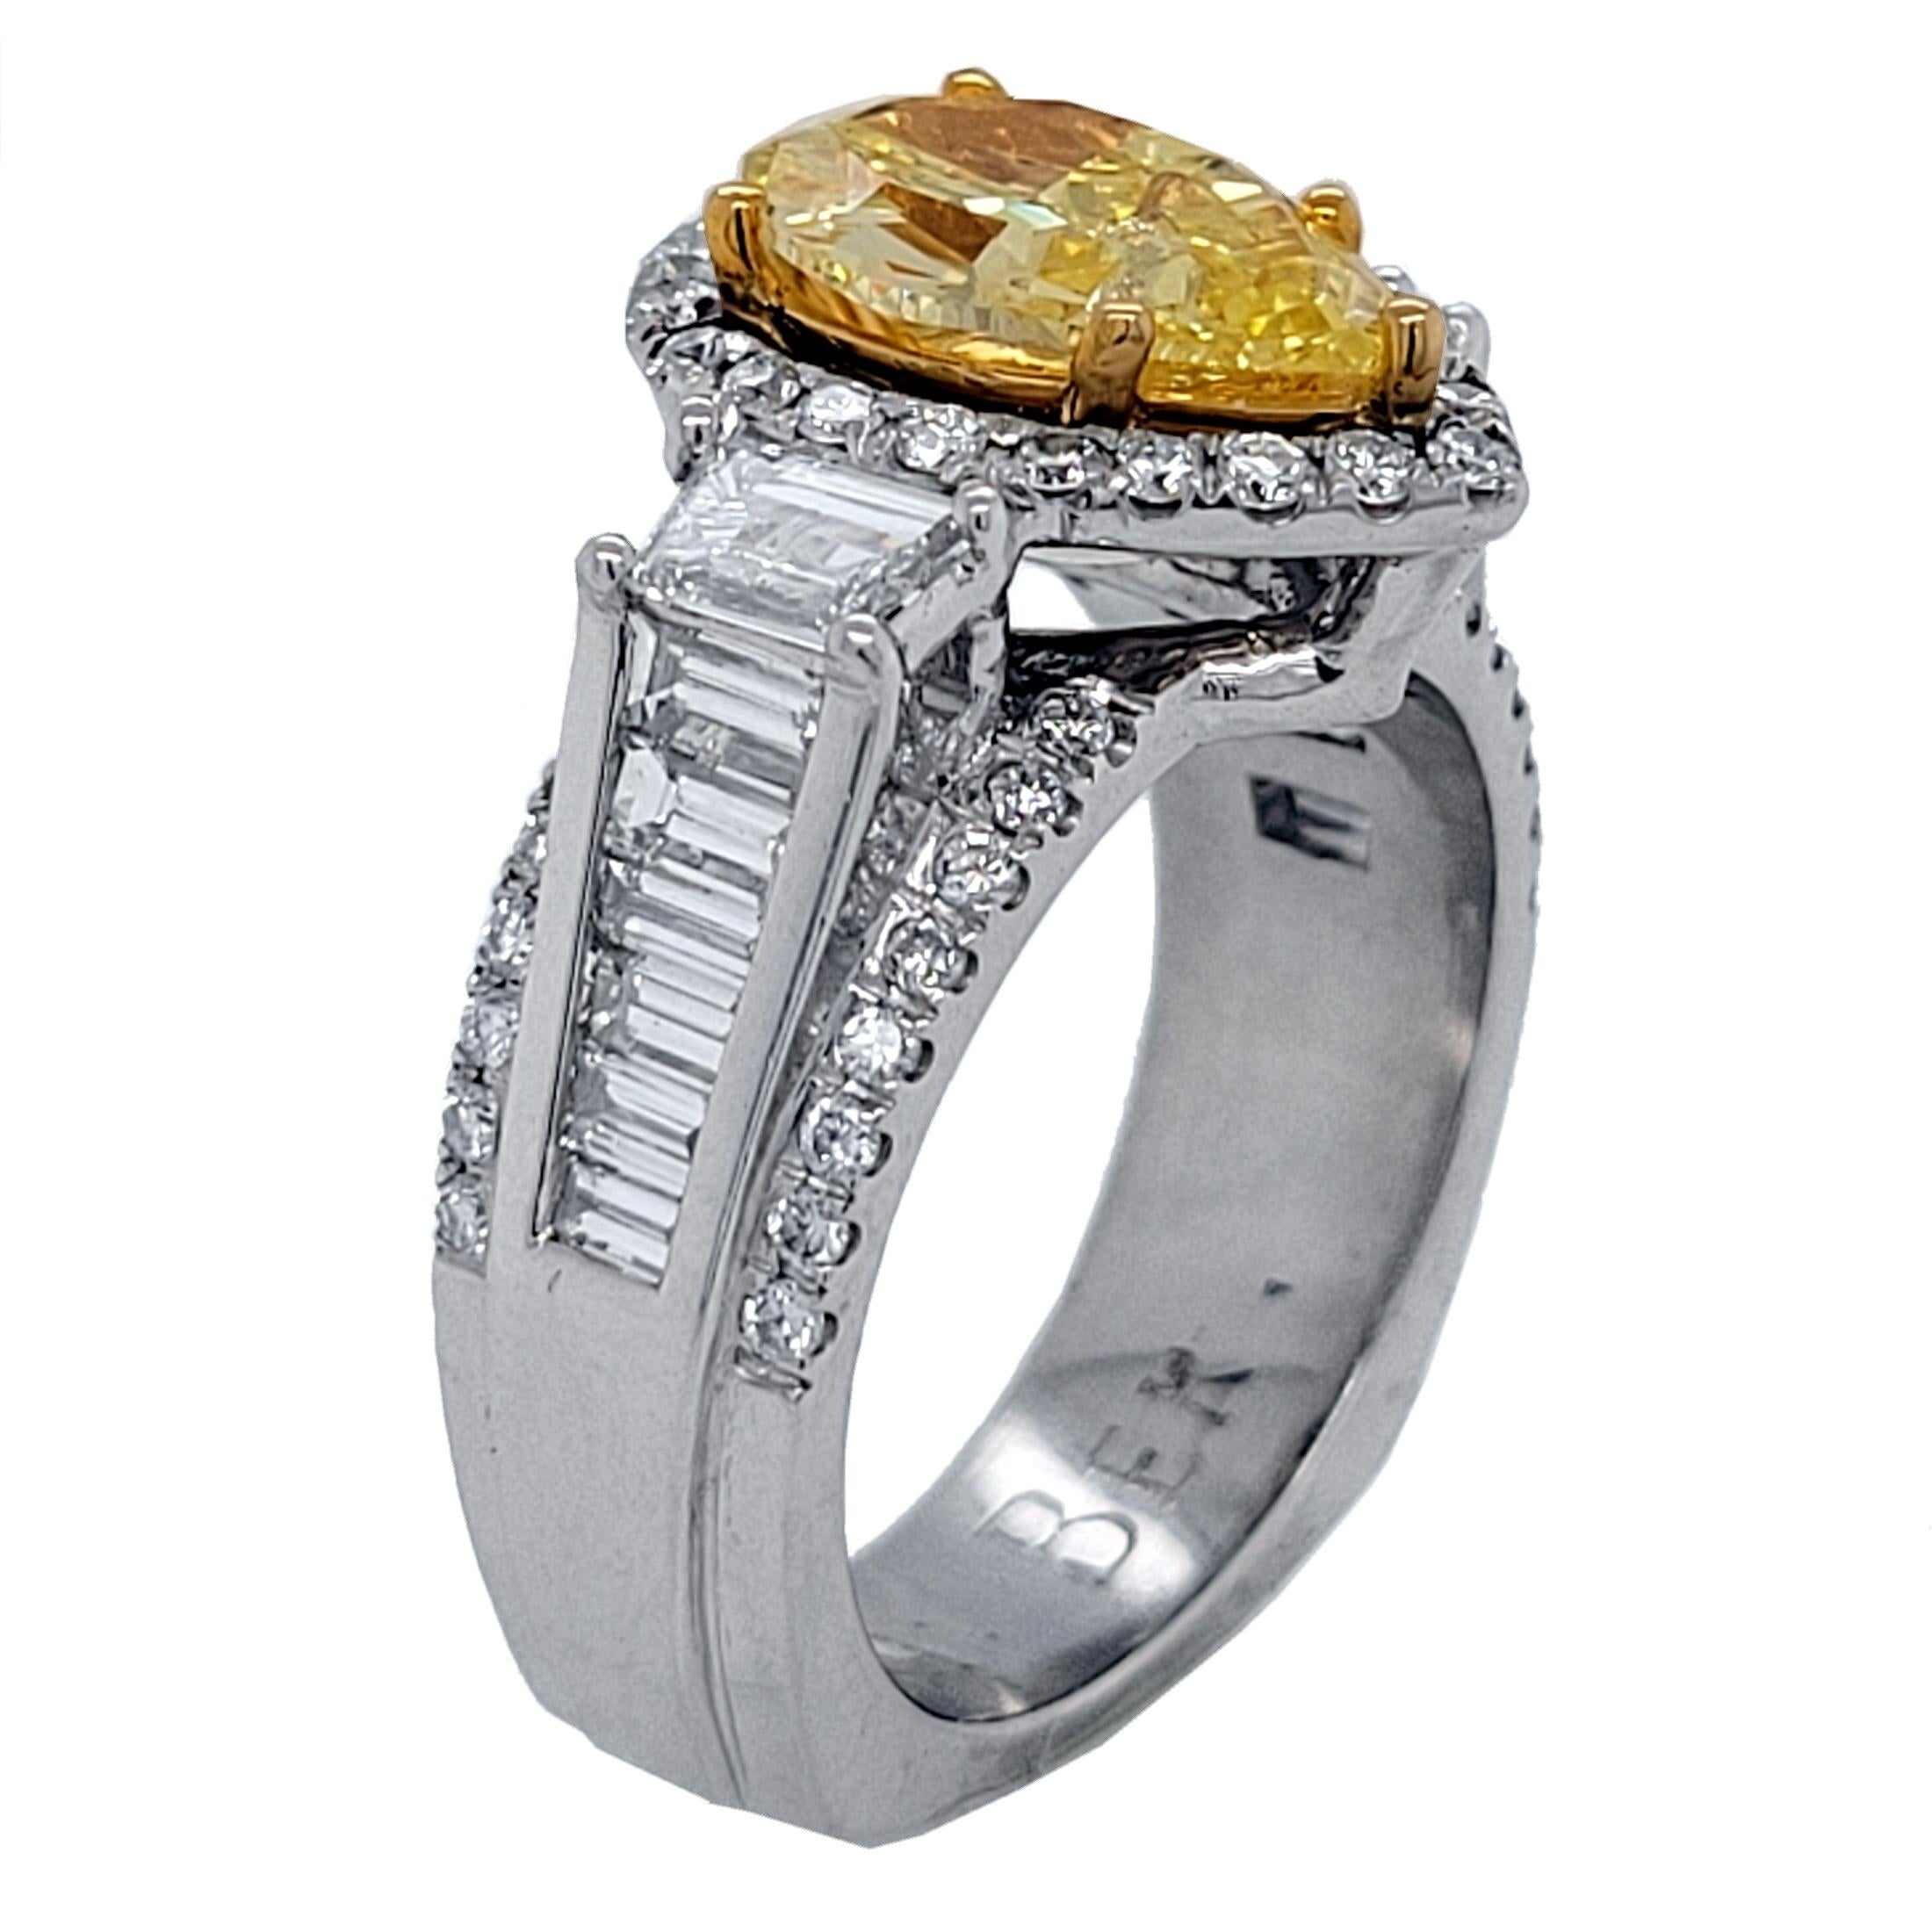 A beautiful Pear Shaped Natural Fancy Intense Yellow GIA certified center Diamond set in a gorgeous platinum pave set Engagement Ring with 2 Trapezoid diamonds on the side along with a series of Channel Set Baguette diamonds on the shoulder with